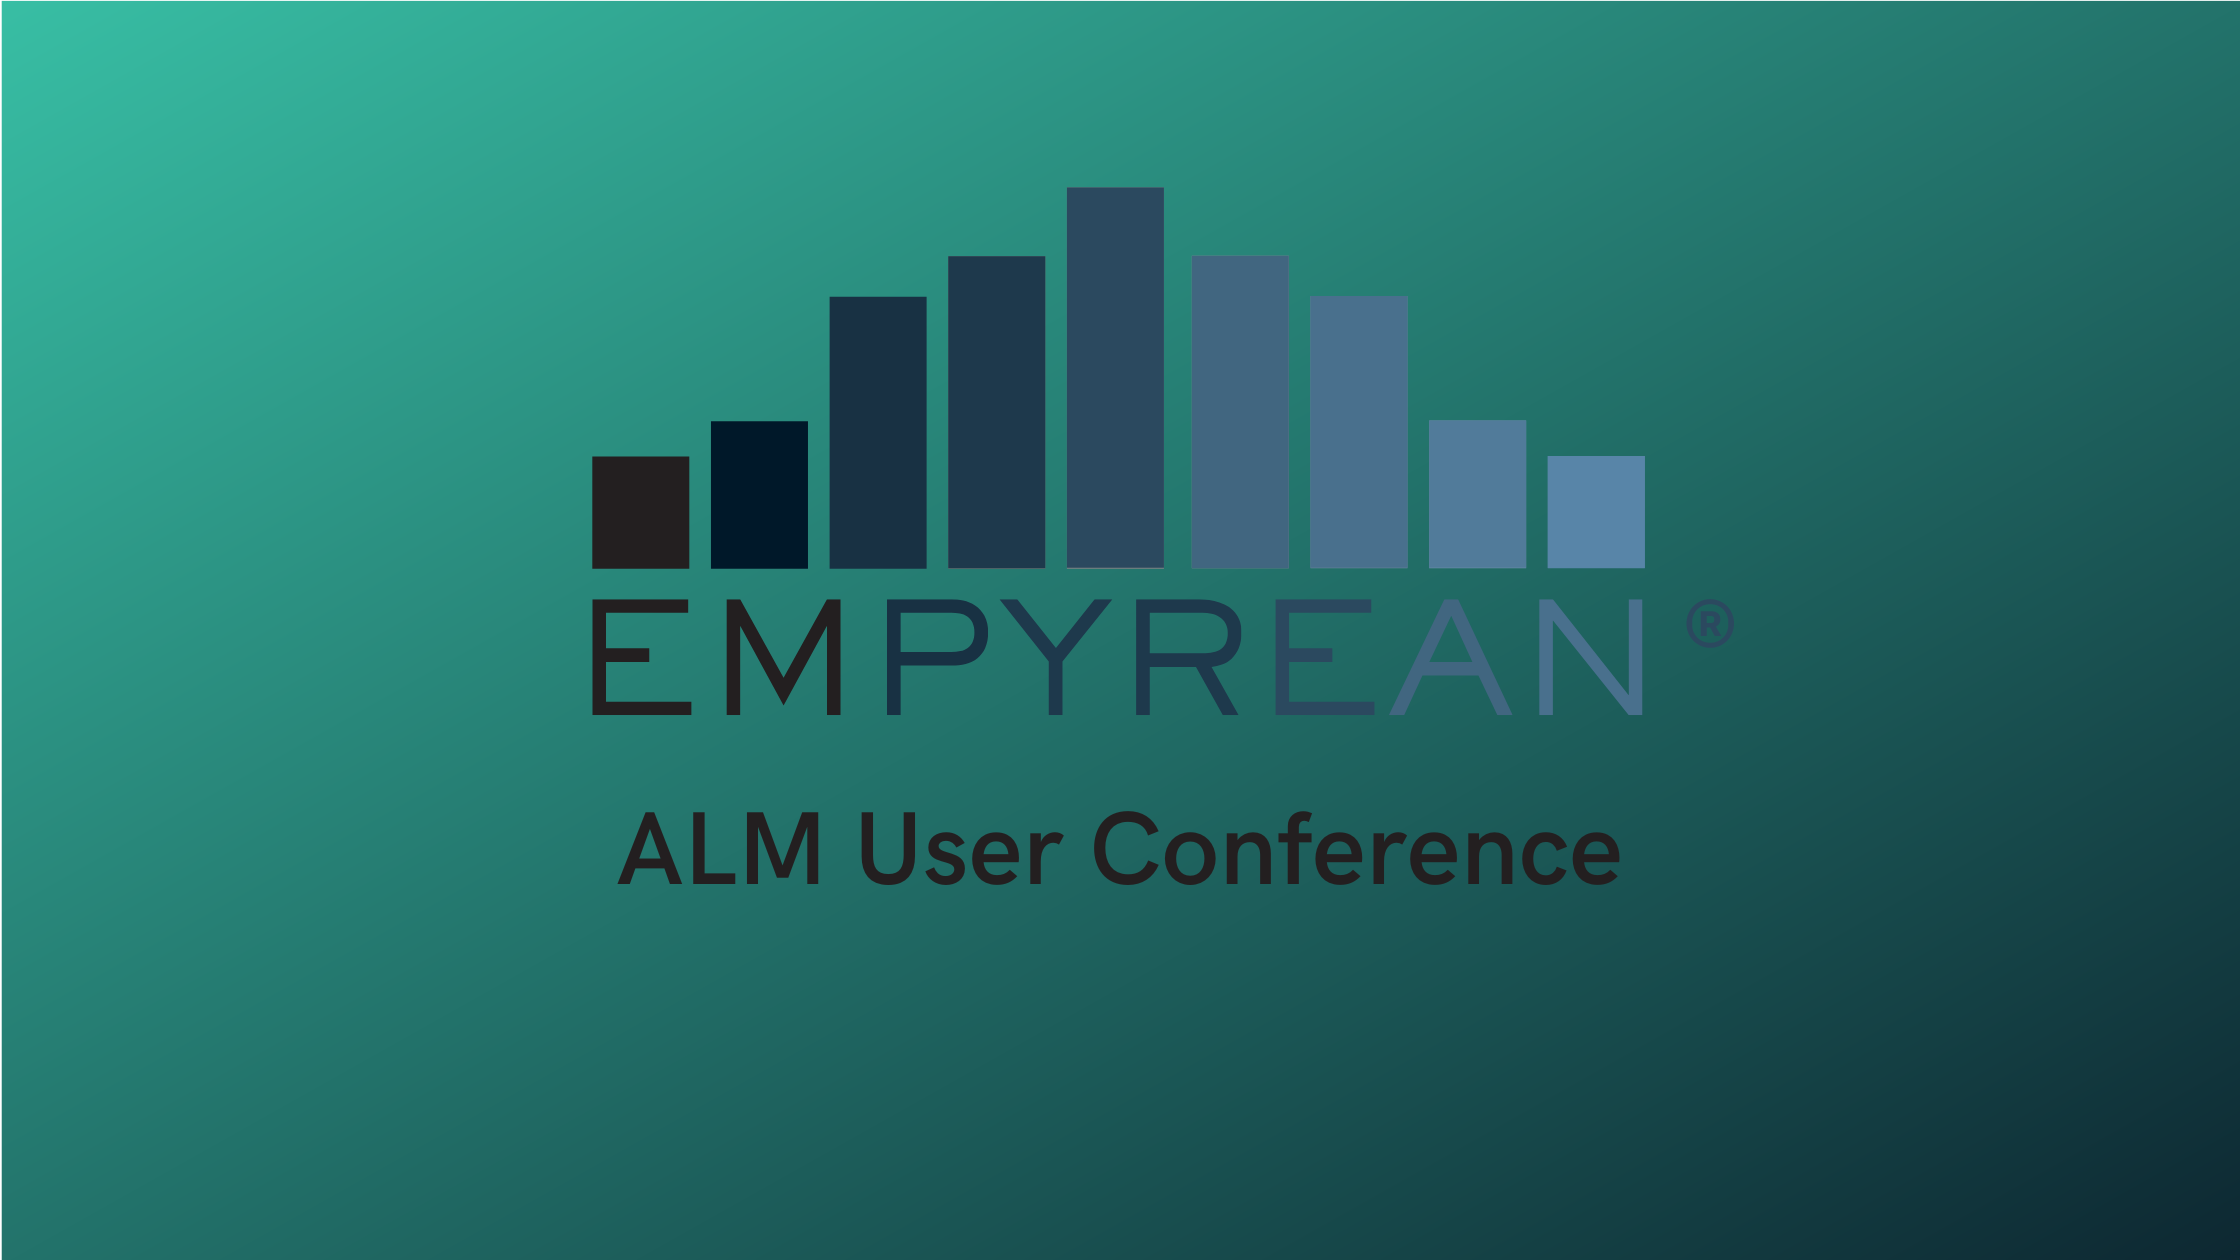 ALM User Conference